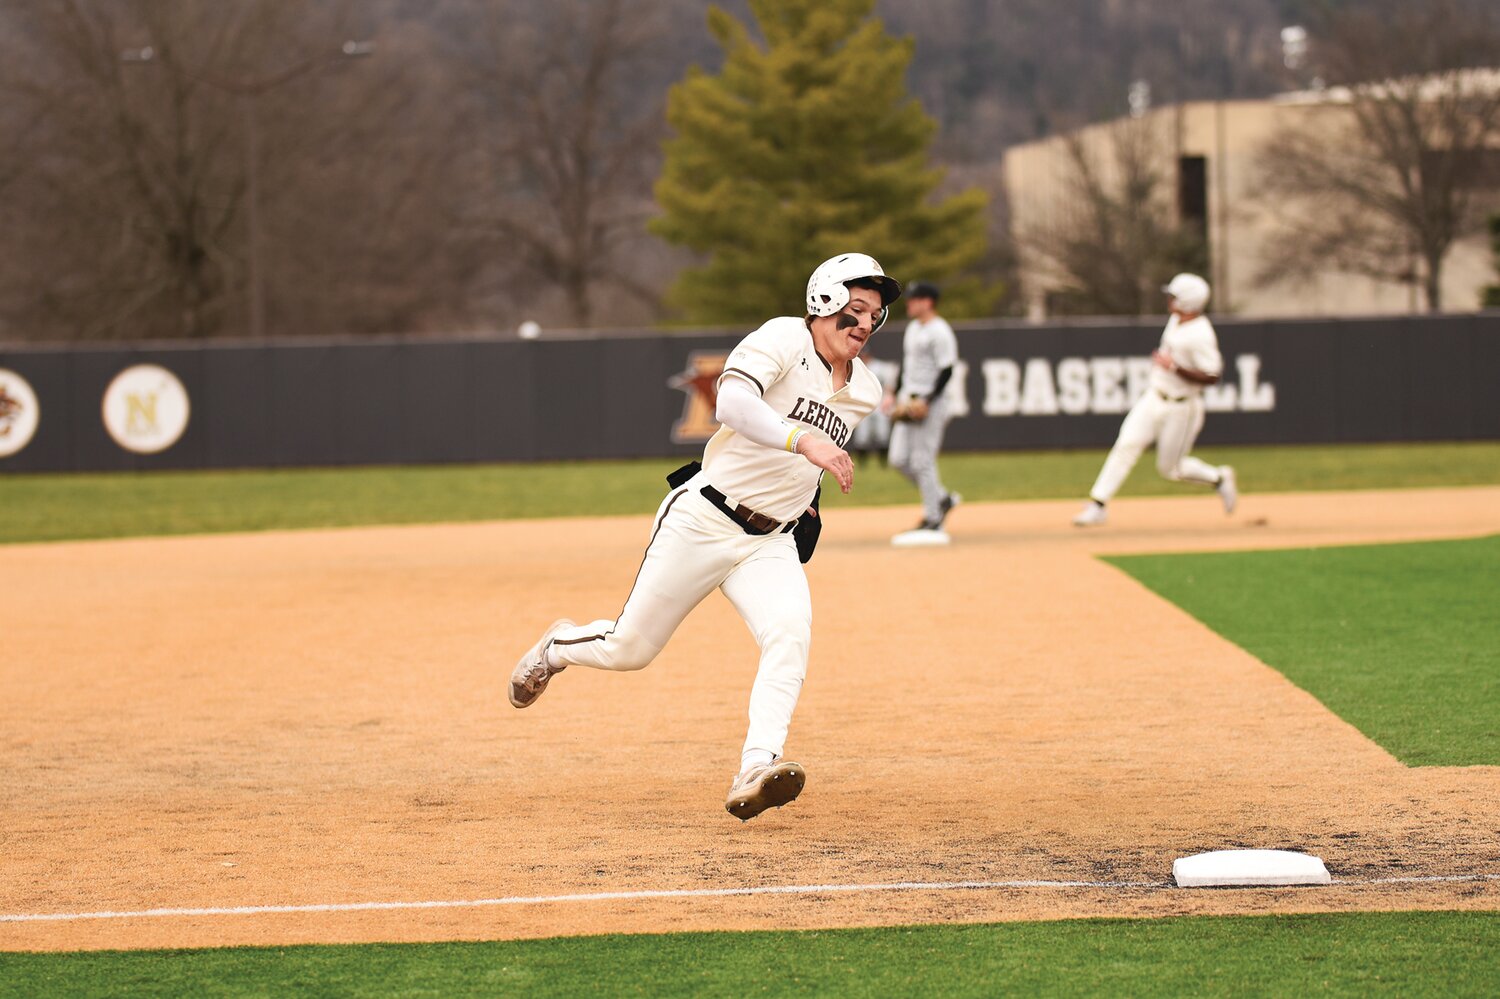 CB West’s Andrew Kohl, a sophomore at Lehigh, was eighth in the Patriot League in homers and sixth in OPS this spring.